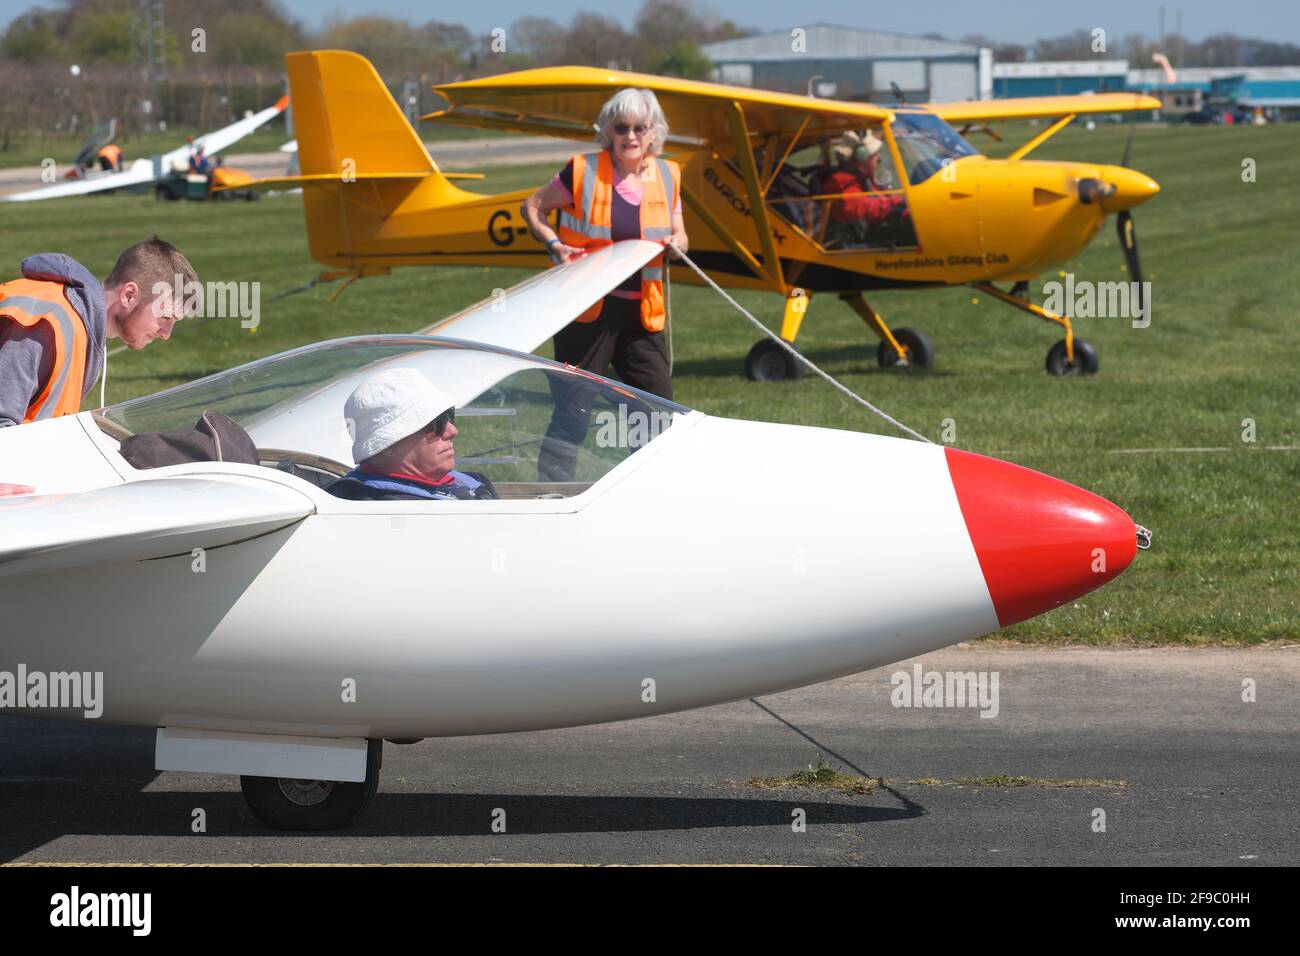 Shobdon, Herefordshire, UK - Saturday 17th April 2021 - UK Weather - Members of the Herefordshire Gliding Club enjoy warm Spring sunshine at Shobdon airfield as a Standard Libelle 201 glider is prepared for launch - local temperatures reached 13C with another fine sunny day forecast tomorrow. Photo Steven May / Alamy Live News Stock Photo